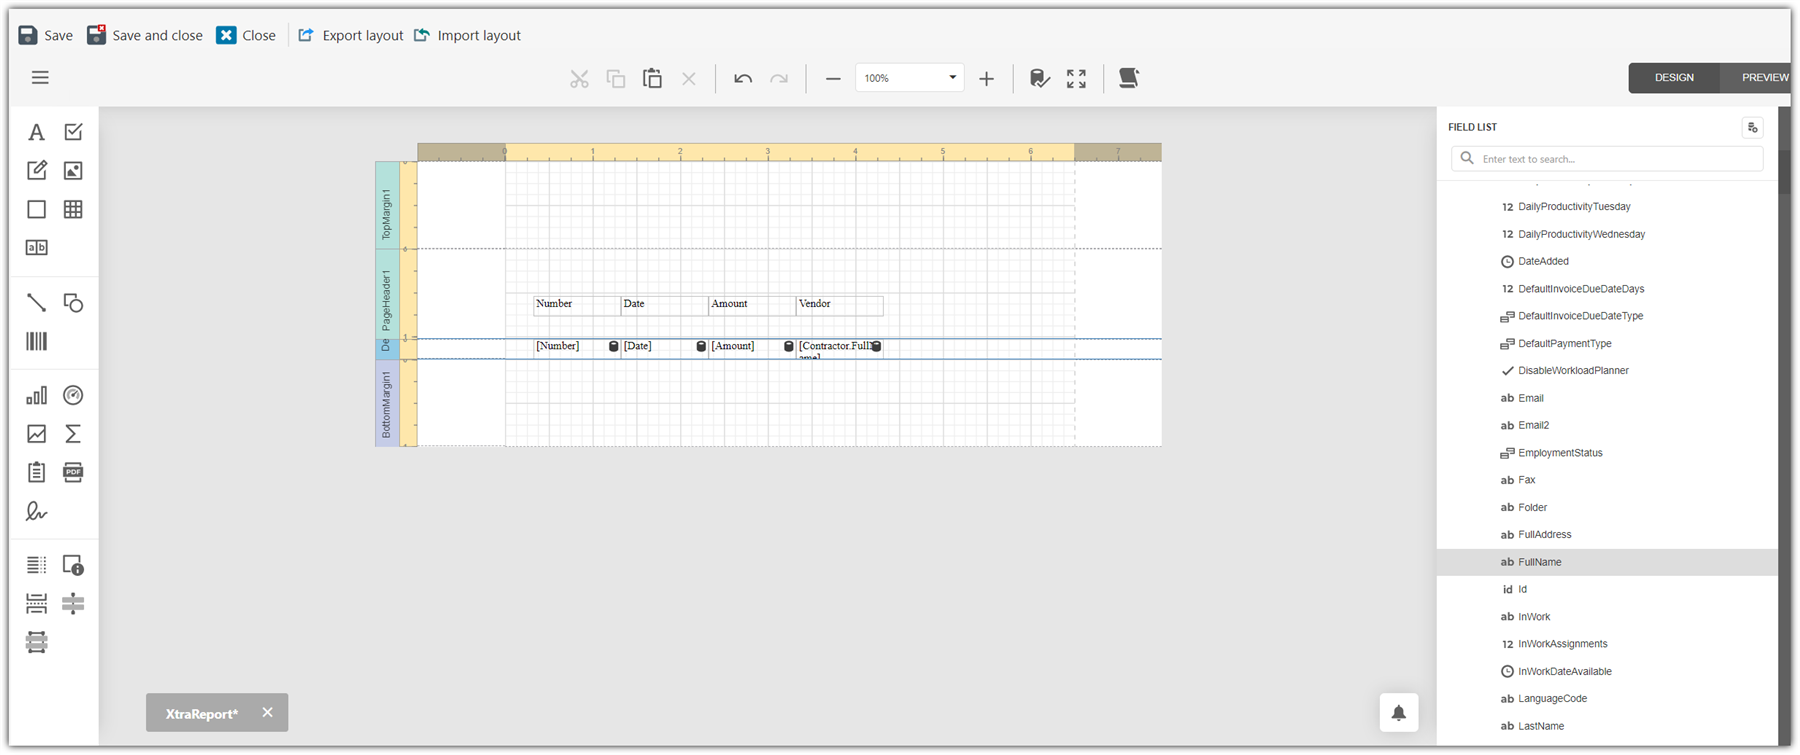 Custom report creation screen in Trados Business Manager with fields for 'Number', 'Date', 'Amount', and 'Vendor' on a grid layout.